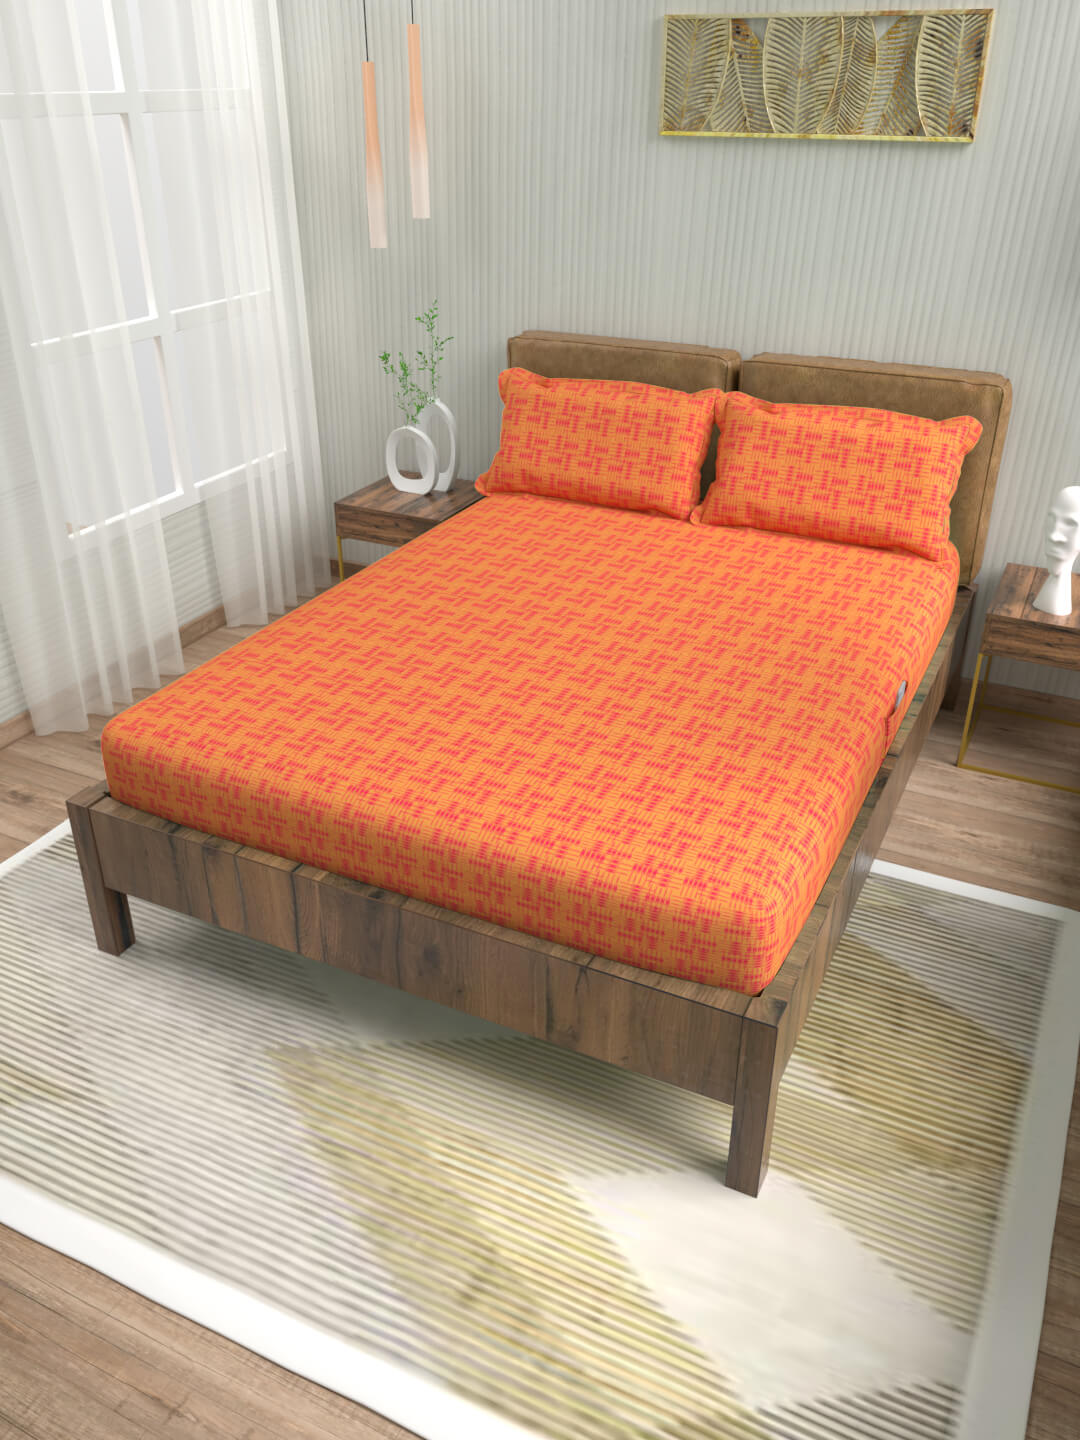 buy geometric orange cotton double bed fitted bedsheets online – side view